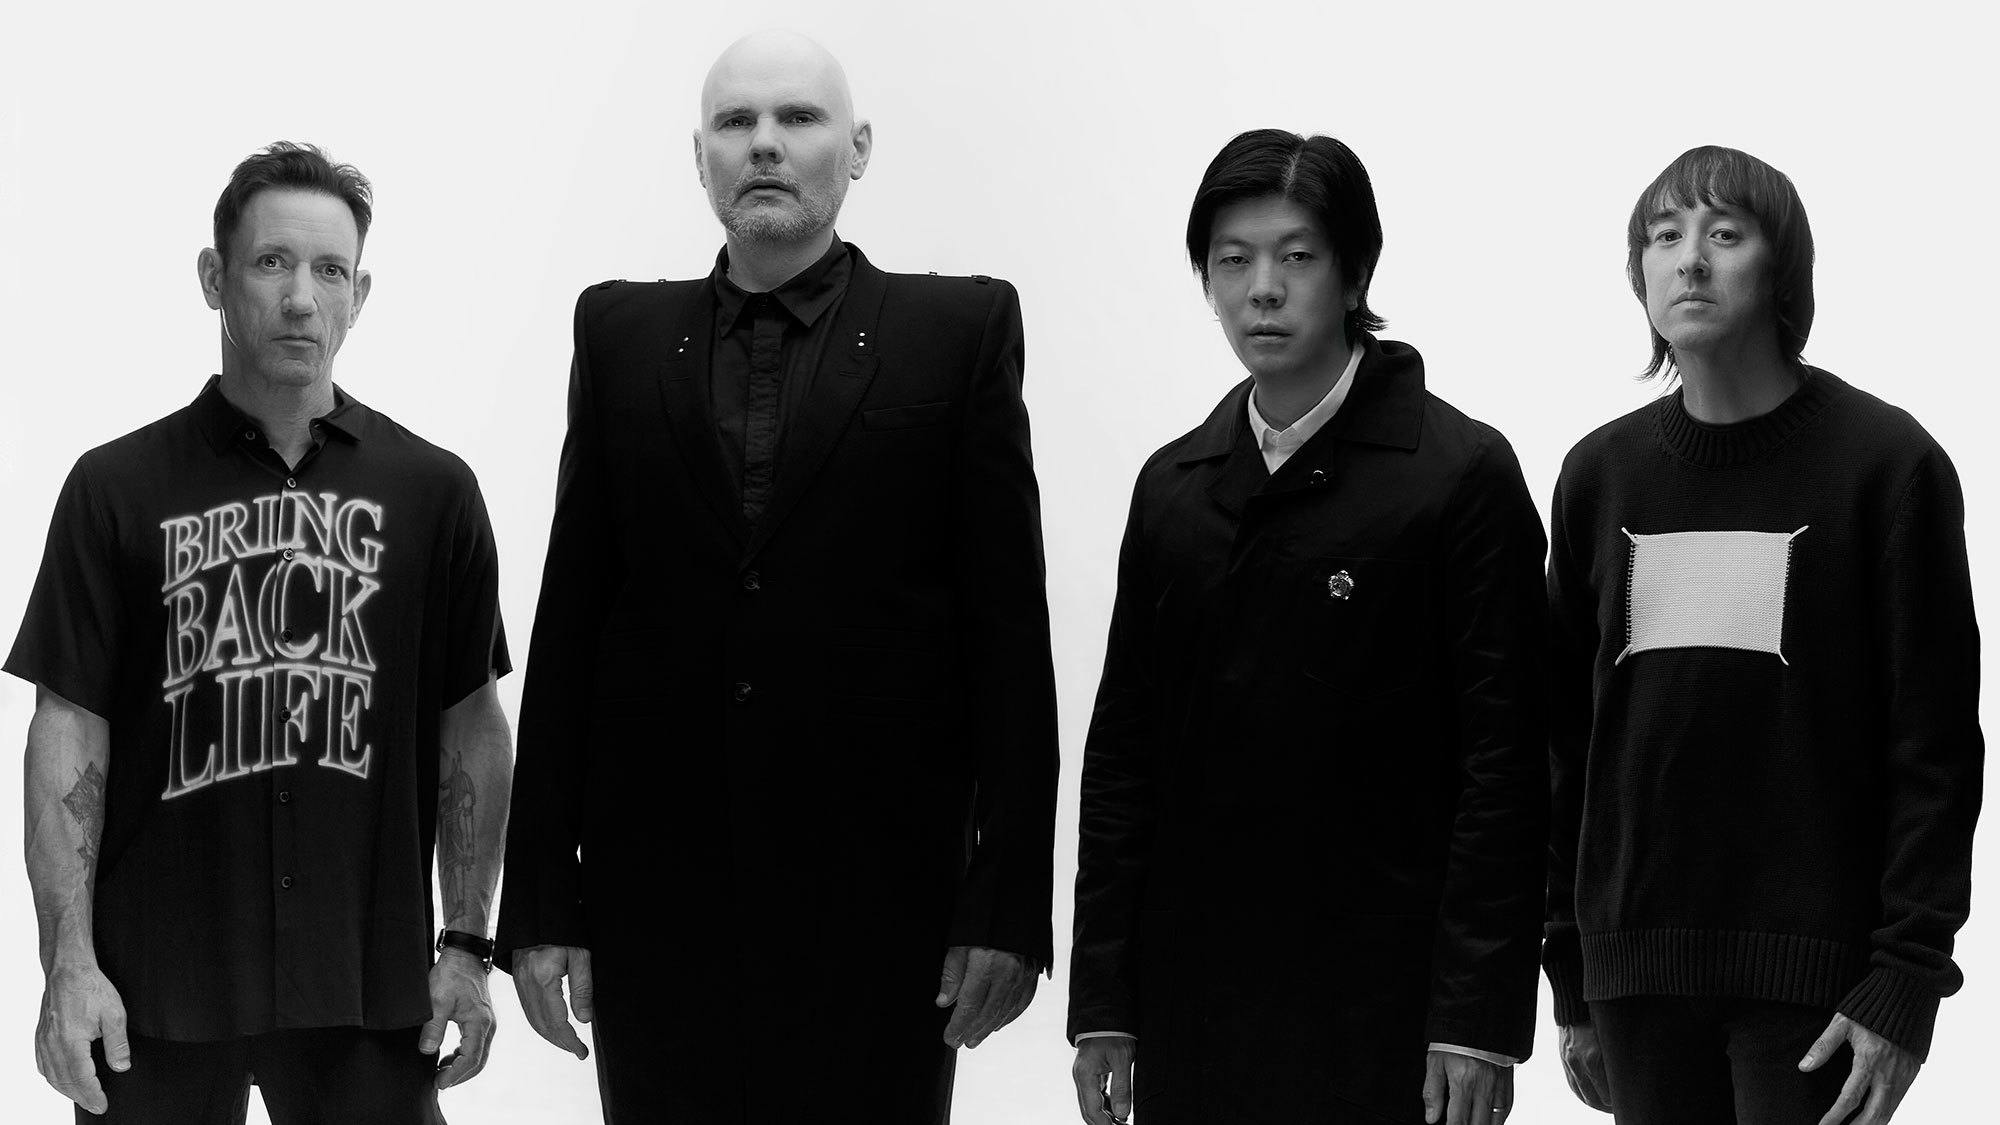 Billy Corgan: "I Was So Worried About Writing Great Songs That I Literally Couldn’t Just Be Myself…"